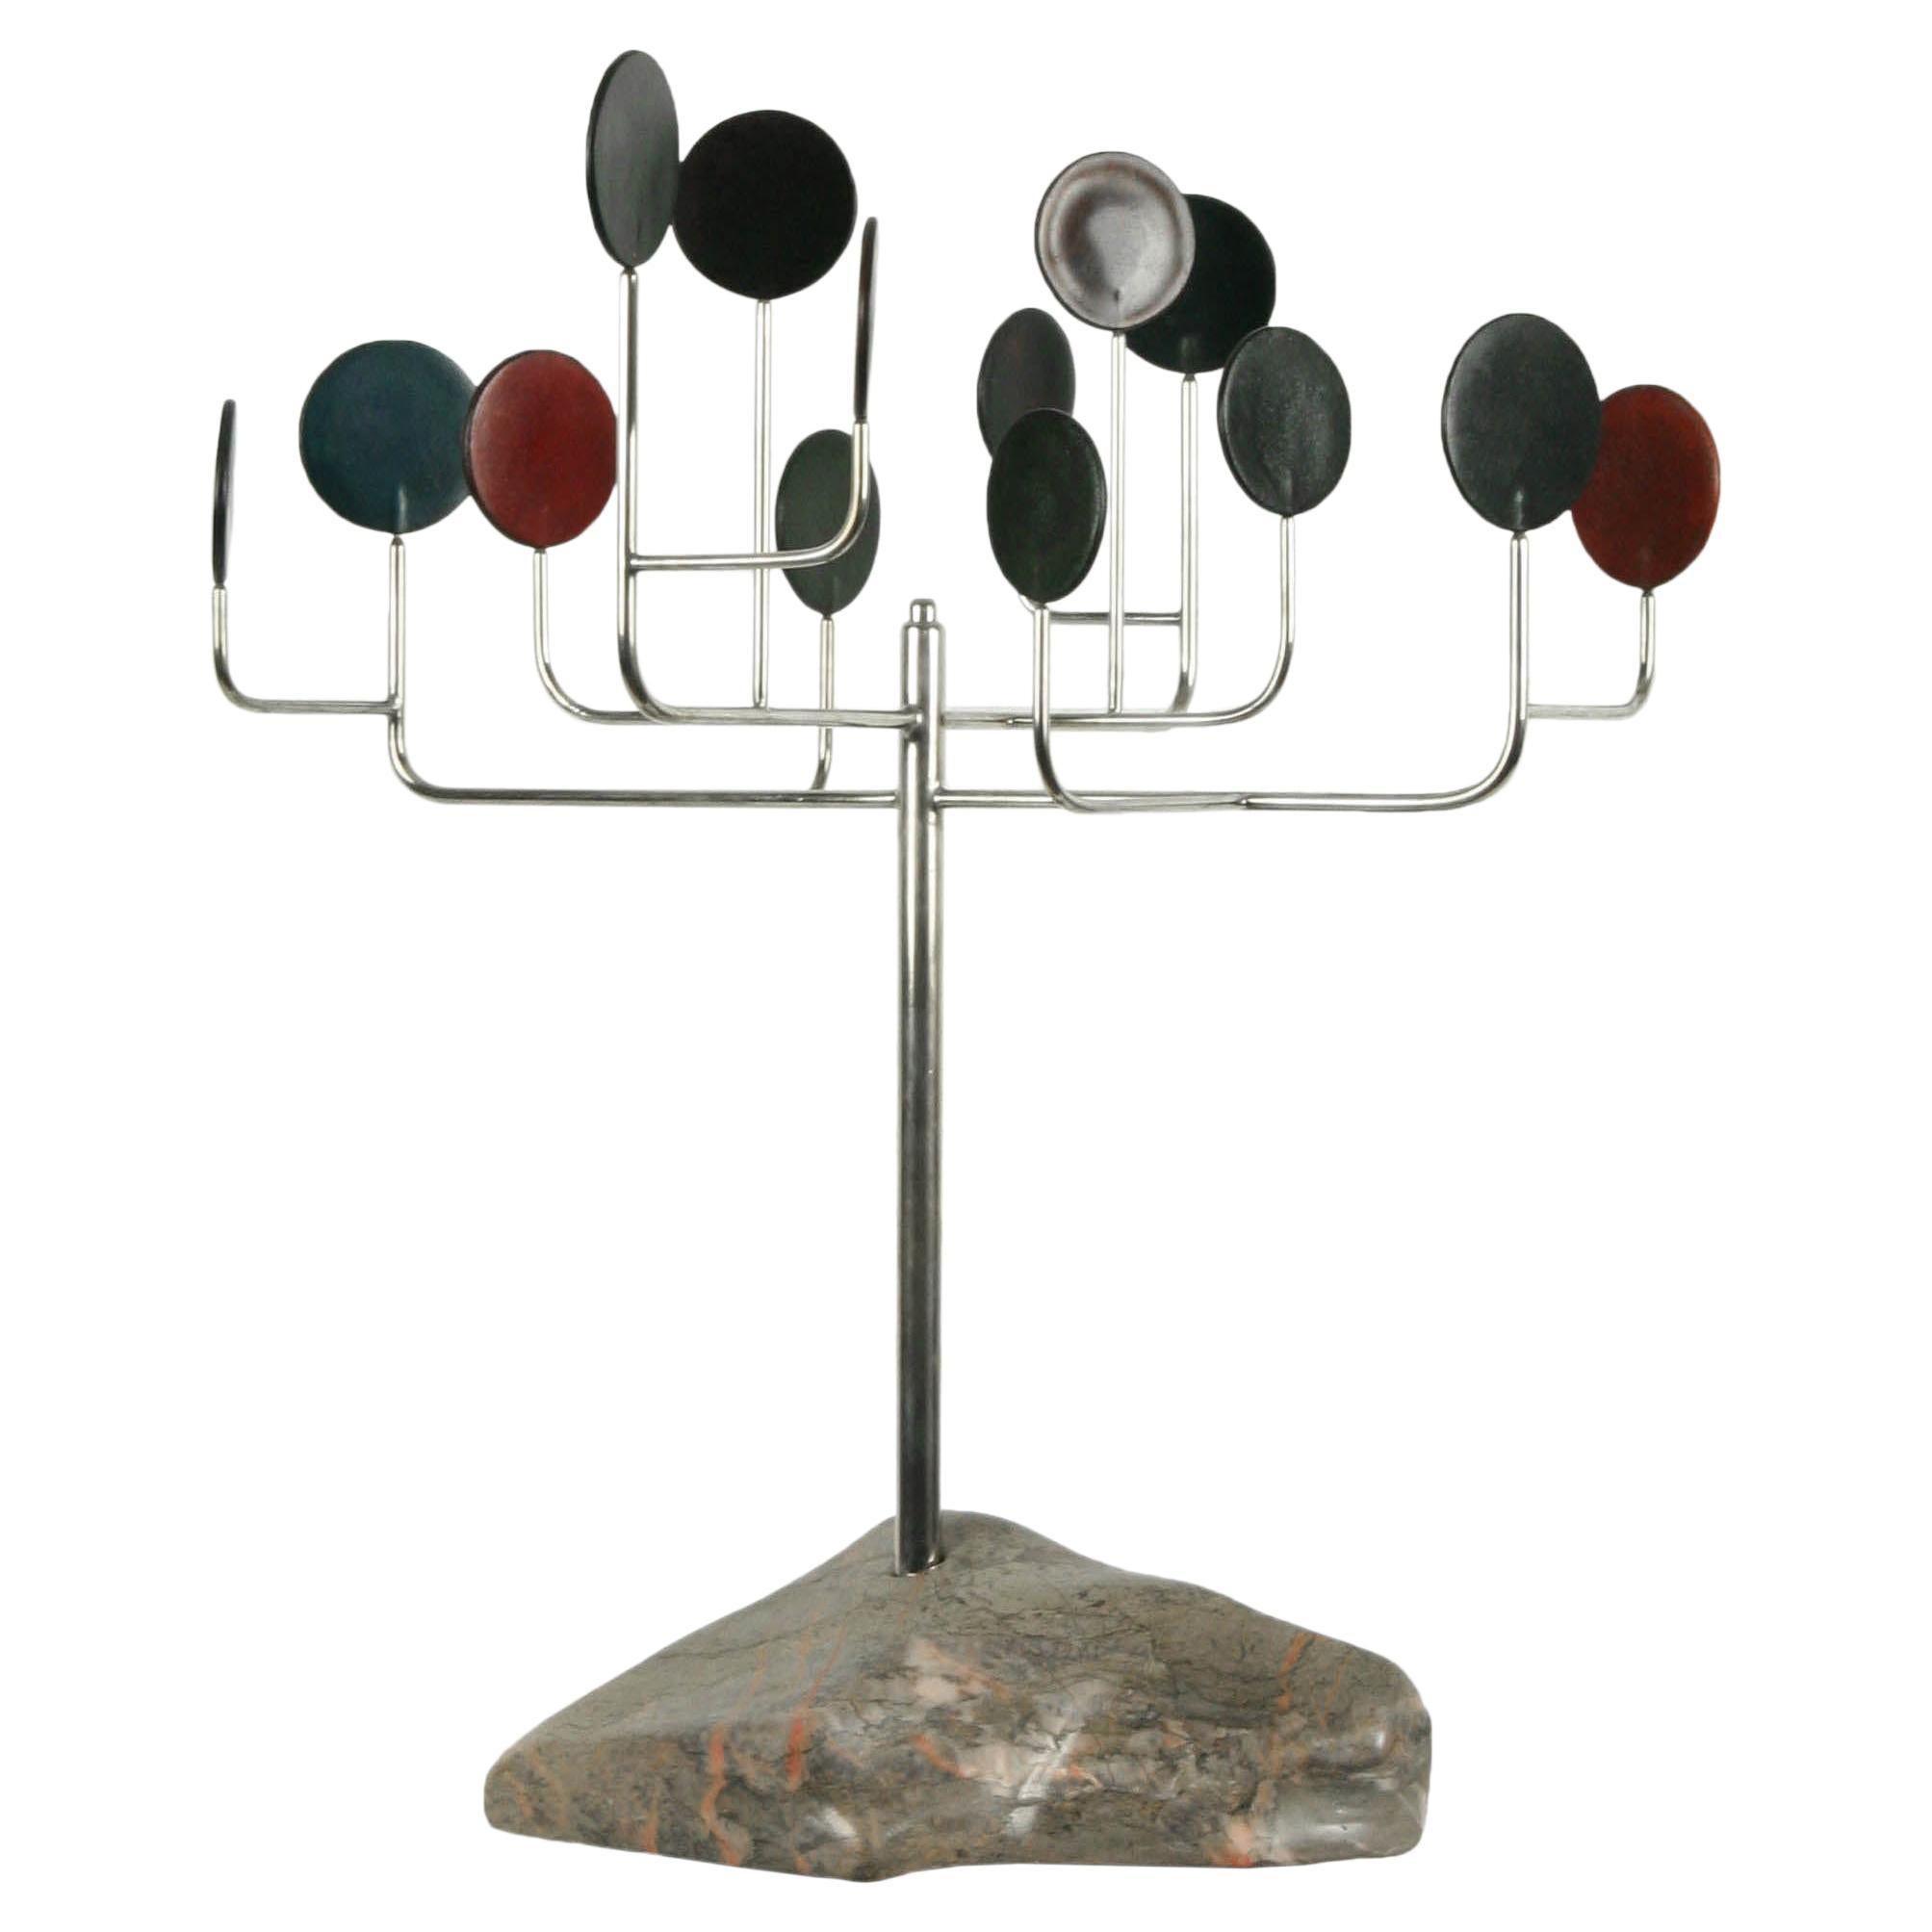 Loleka-14 Tree Sculpture of Brass, Marble and Leather For Sale